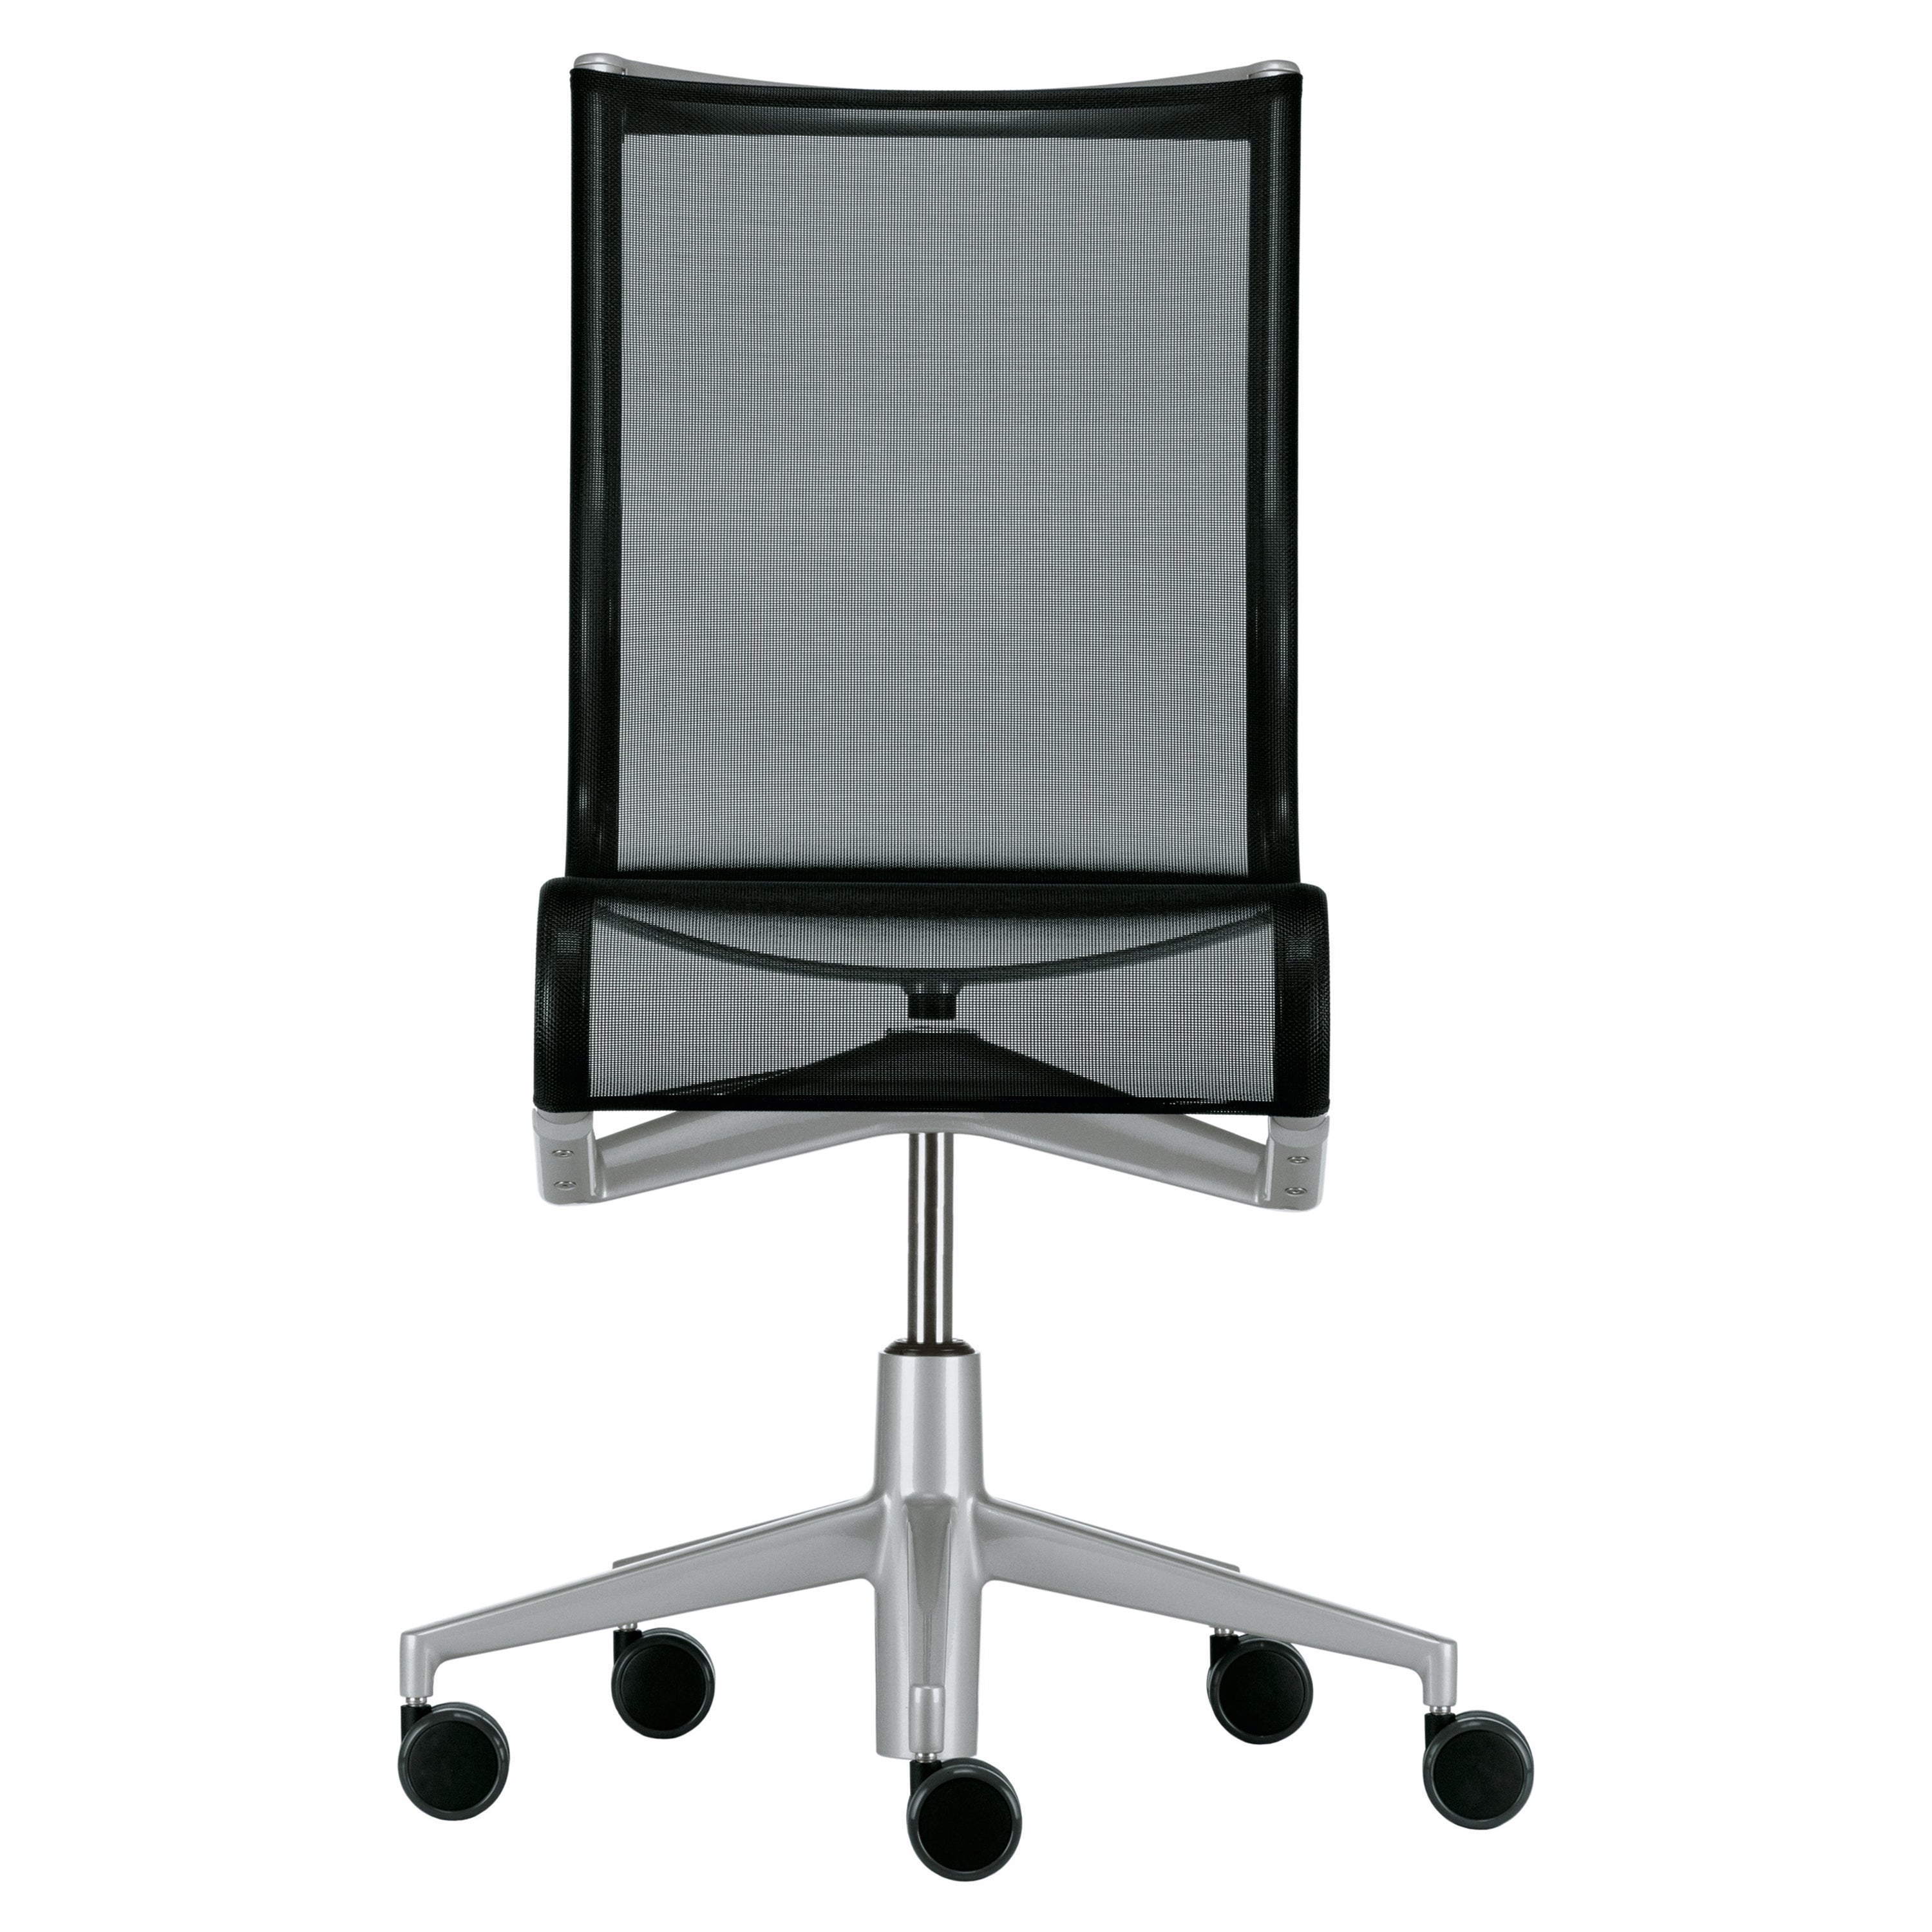 Alias 432 Rollingframe 44 Chair in Black Mesh with Grey Lacquered Aluminum Frame